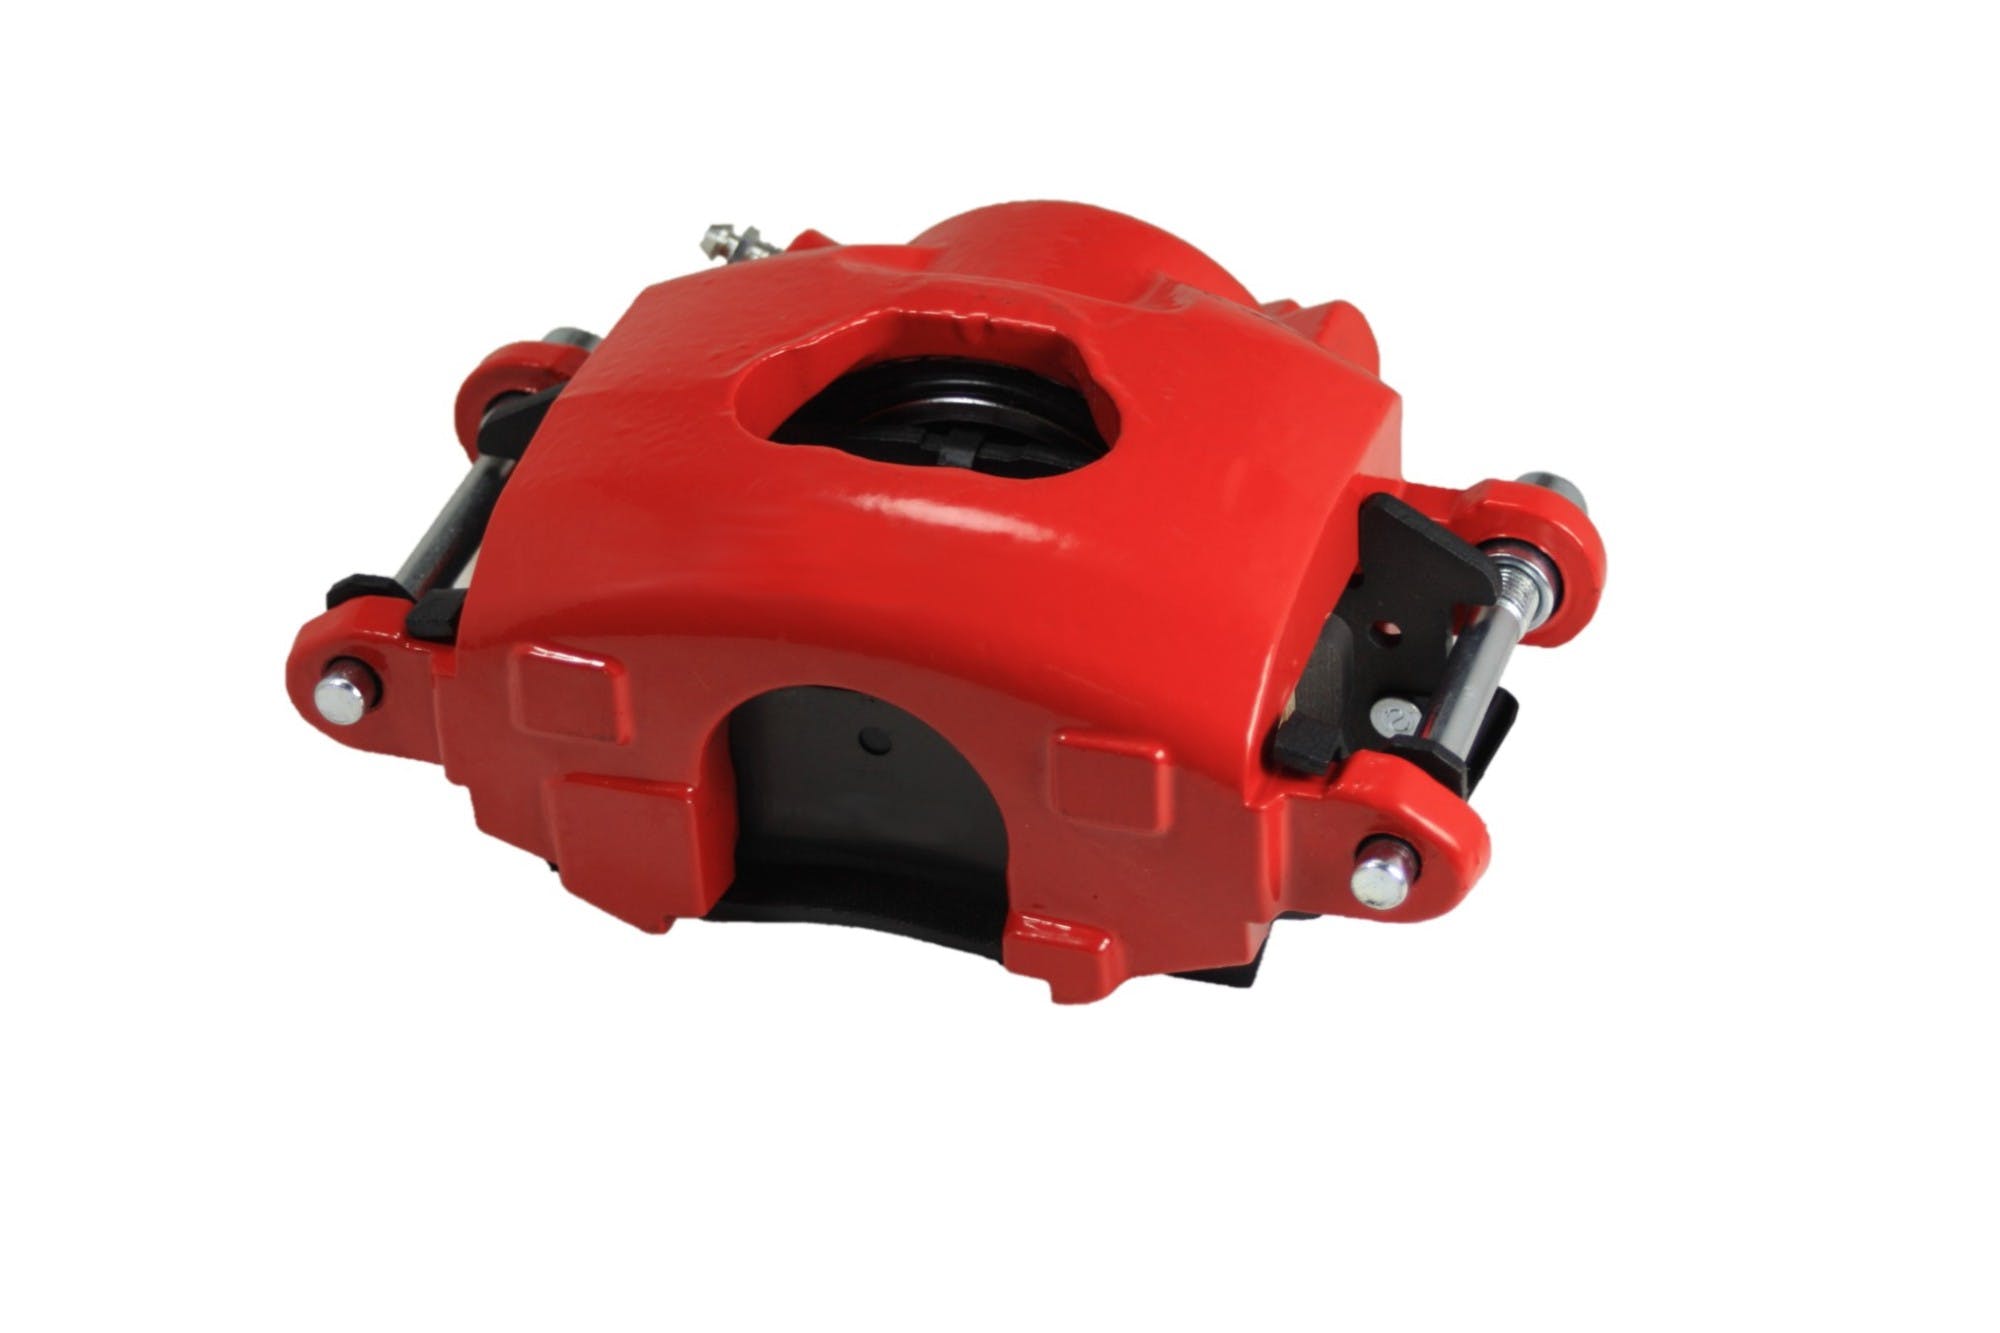 LEED Brakes RFC1010-K1A3X Front Disc Brake Conversion, Power Disc/Disc - MaxGrip XDS - Red